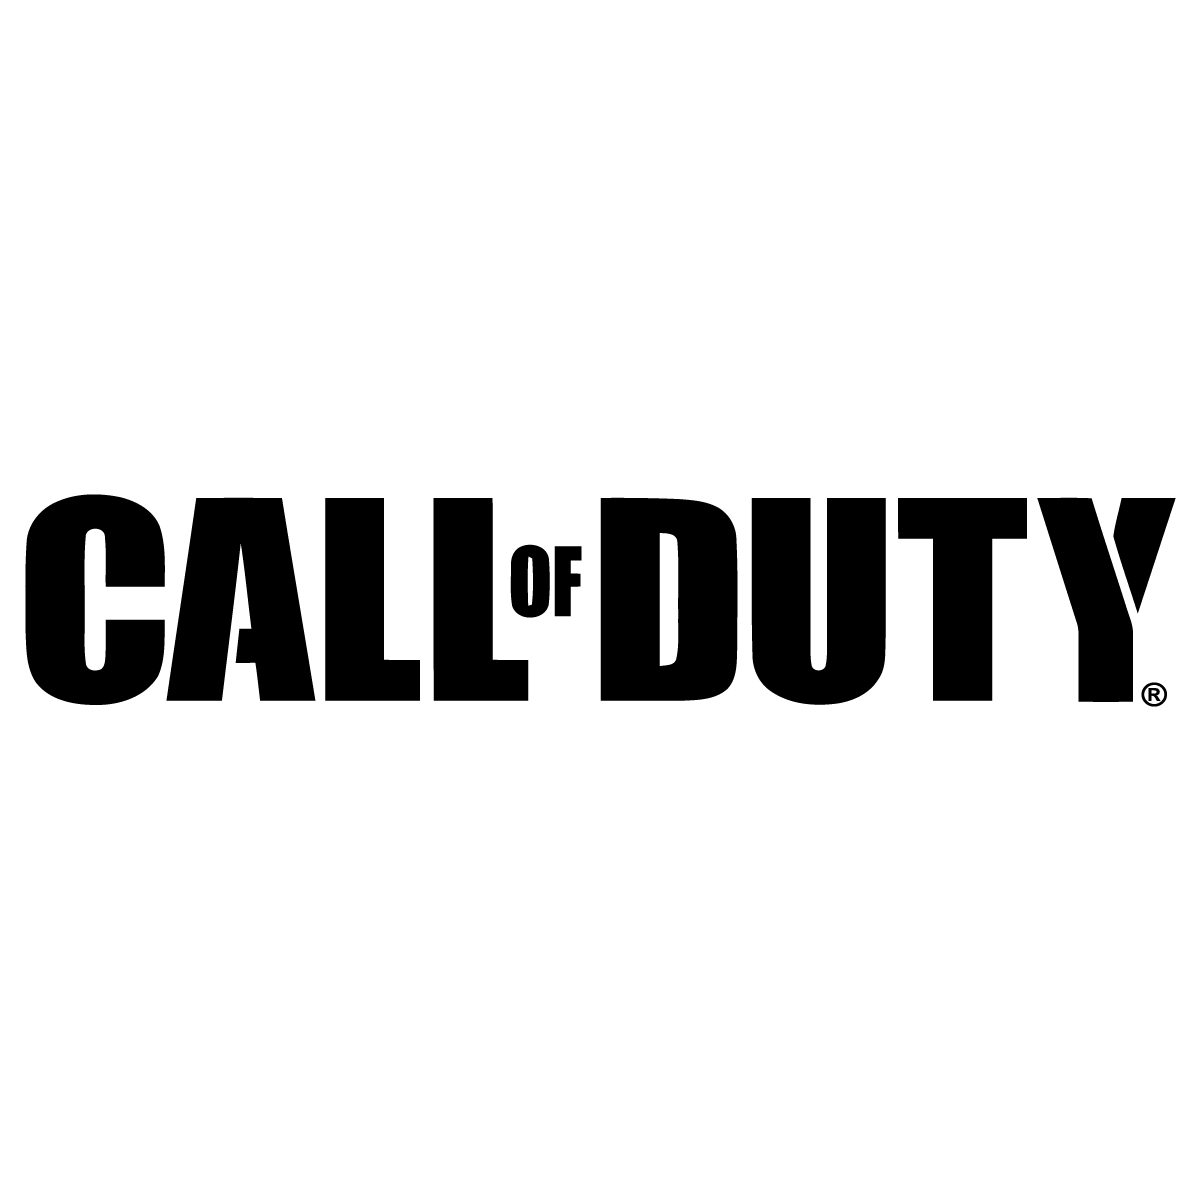 Call of Duty Logo - Call Of Duty Logo Vector | Free Vector Silhouette Graphics AI EPS ...